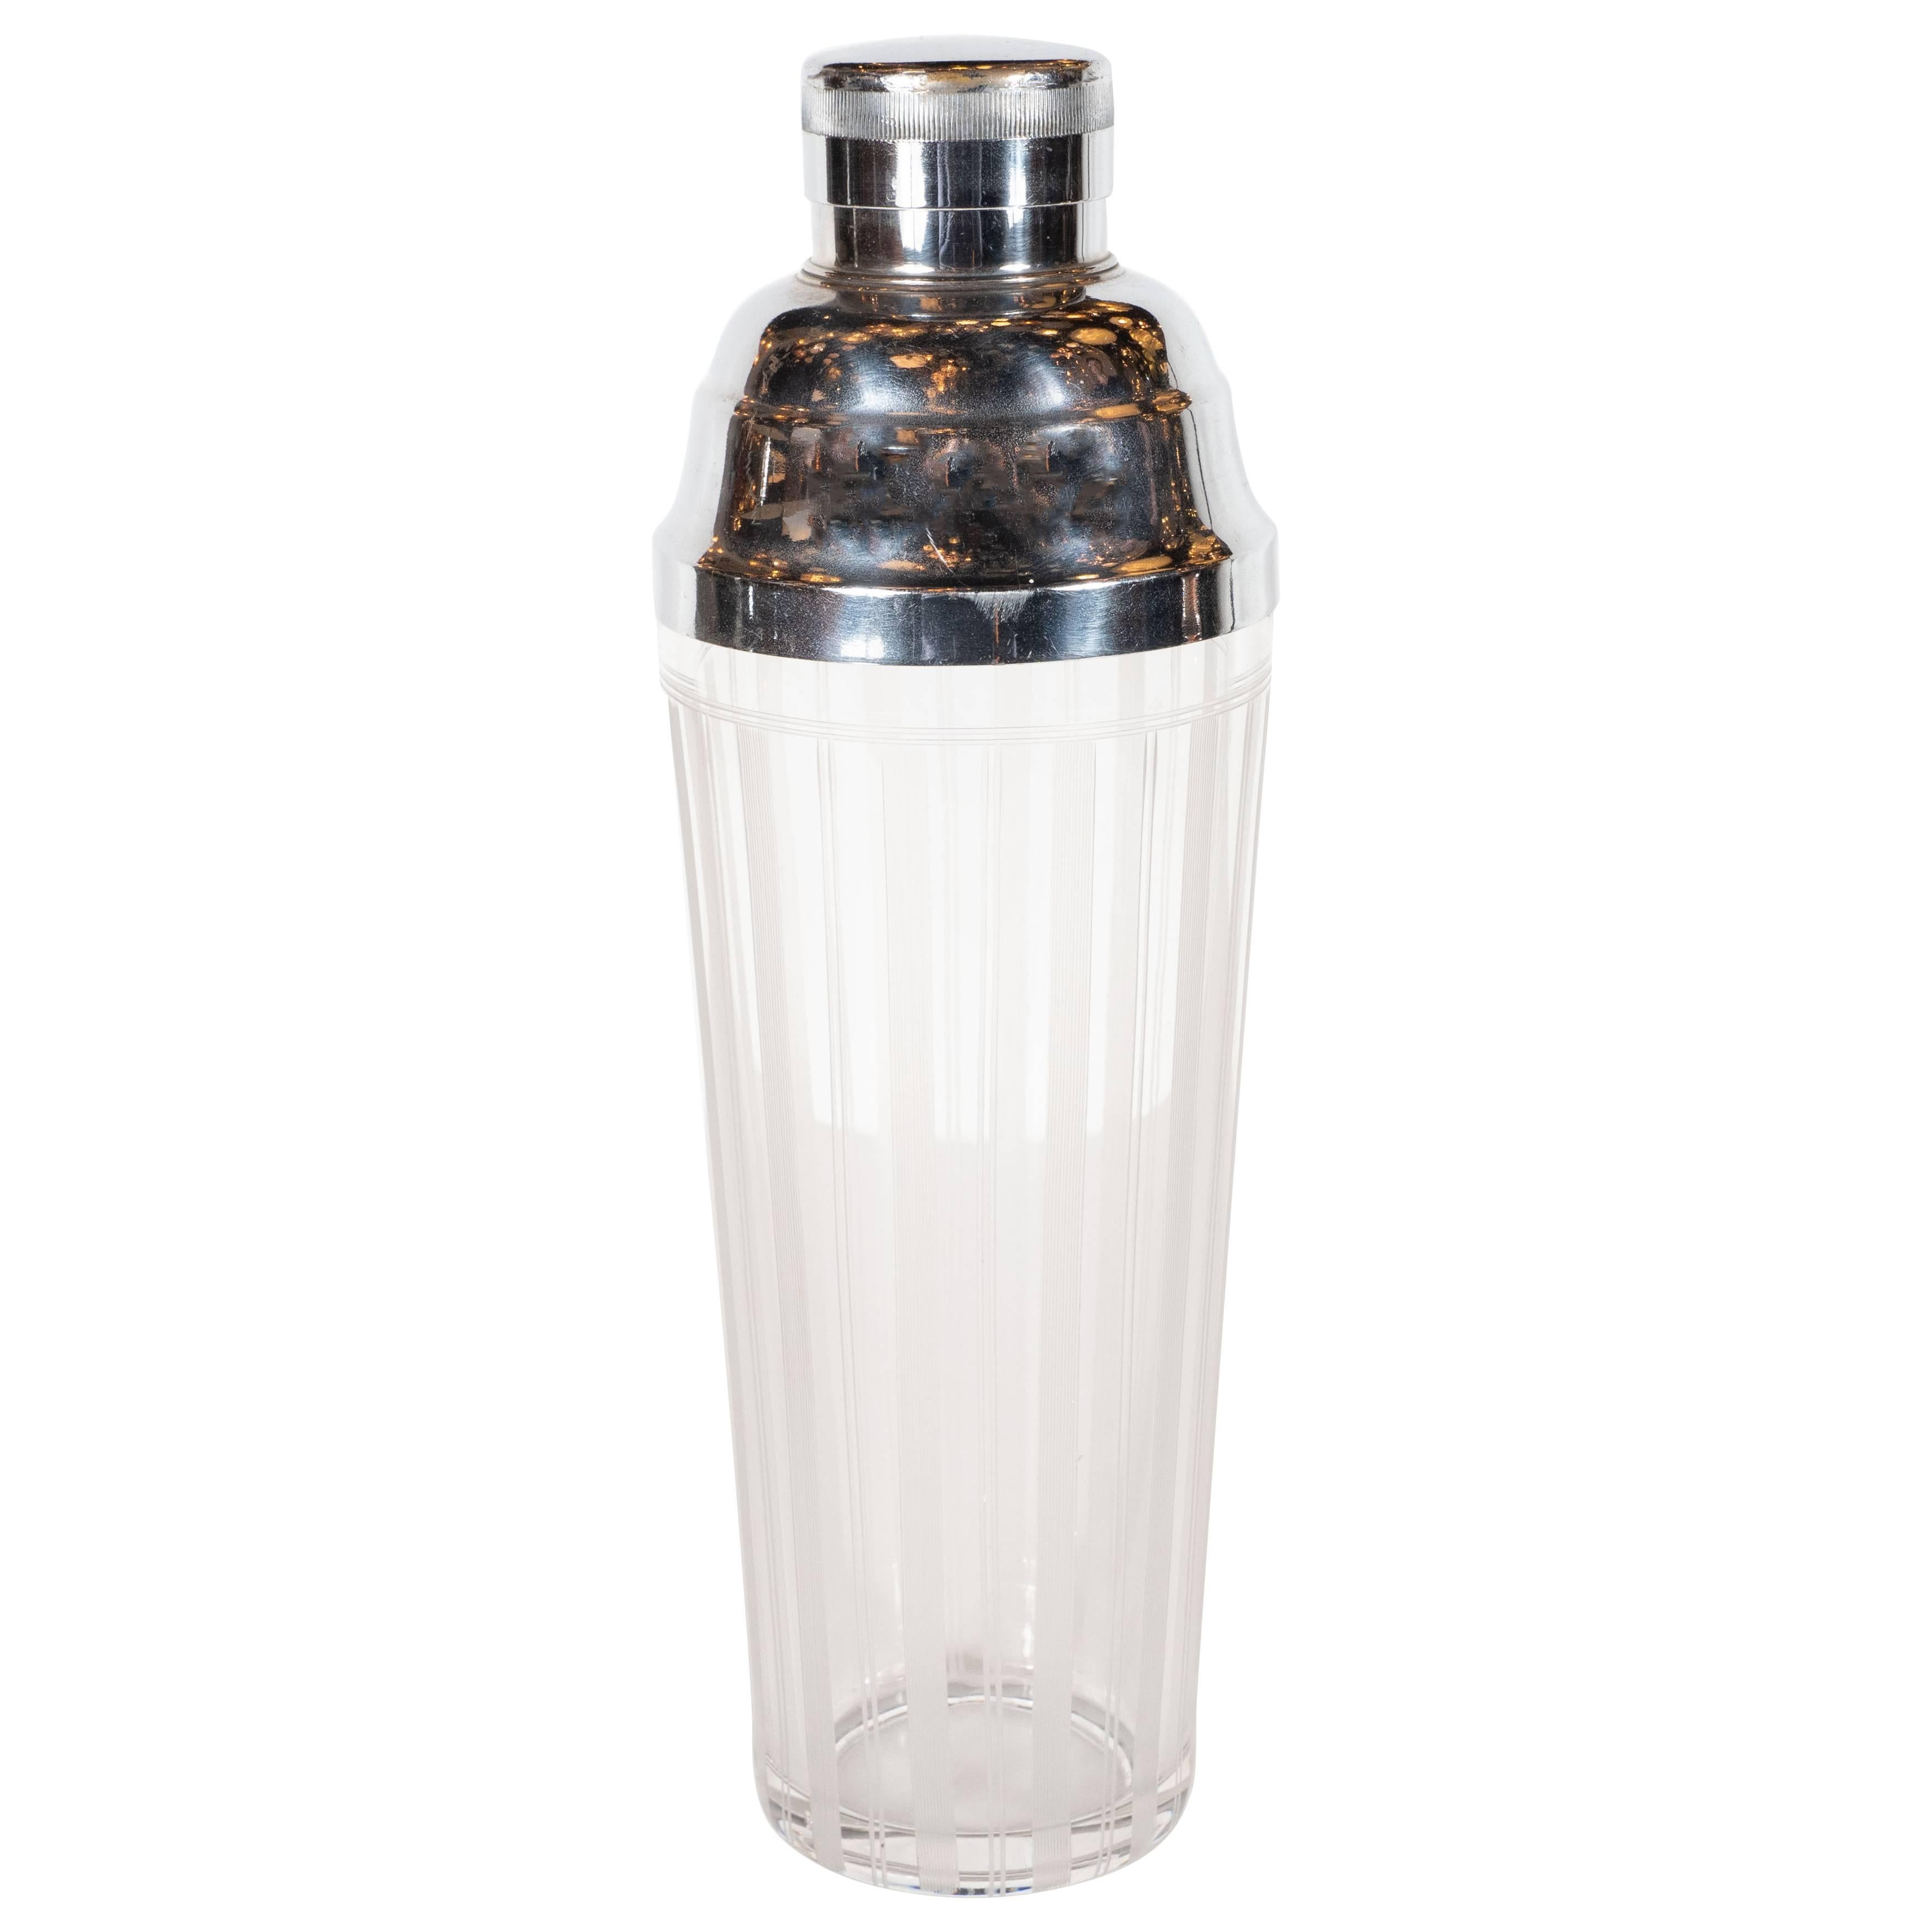 American Art Deco Machine Age Etched Glass and Chrome Cocktail Shaker